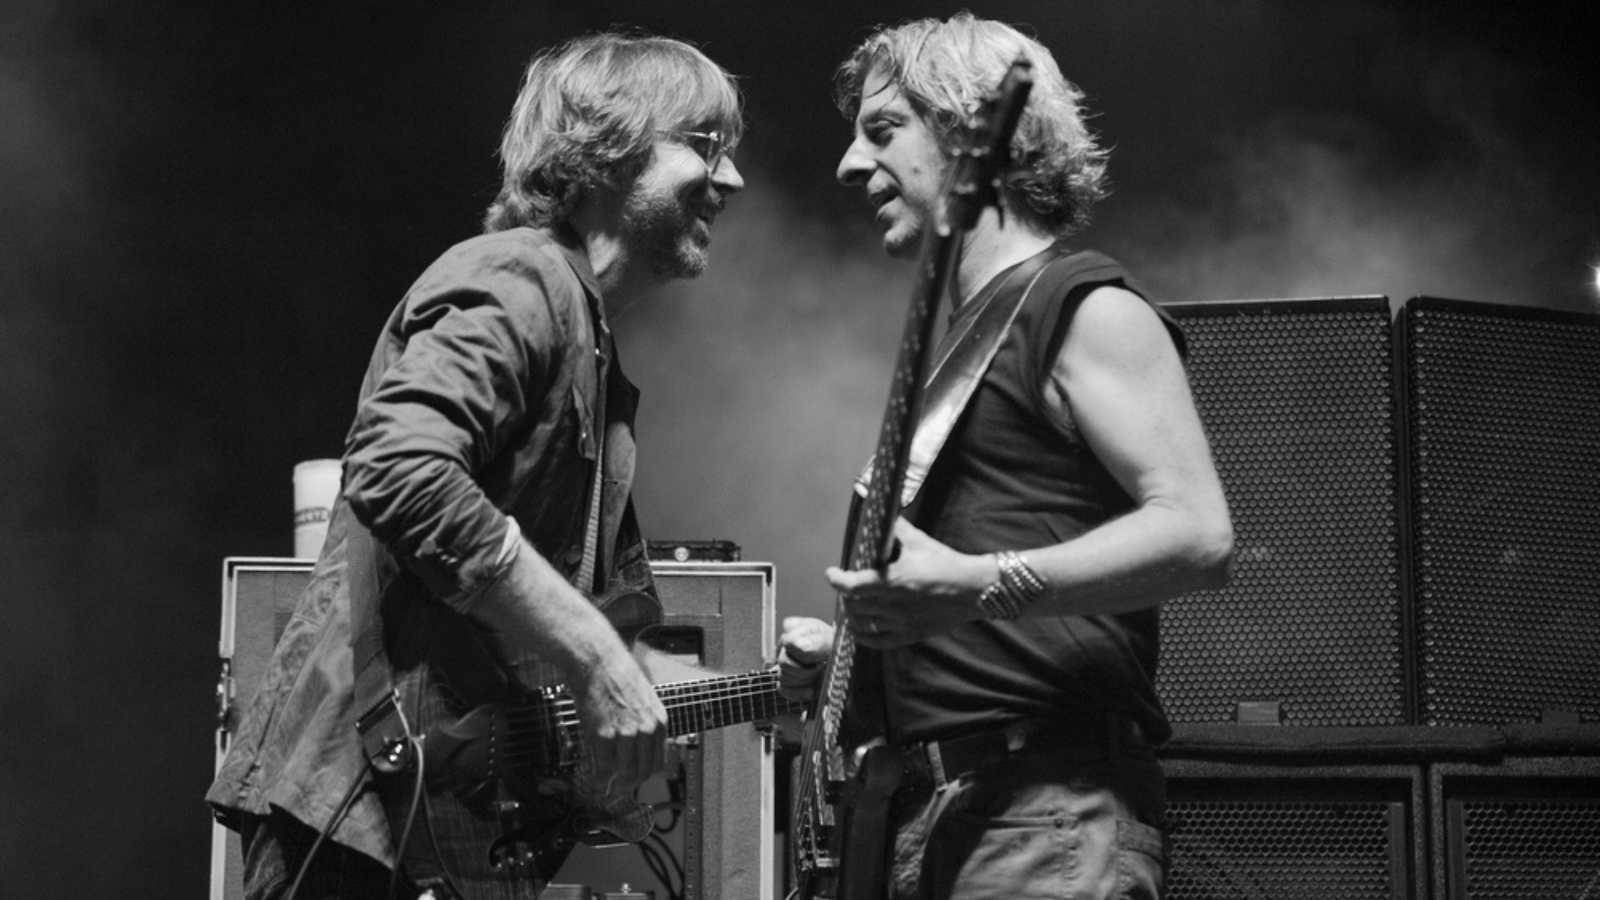 LONG BEACH, CA - AUG 15: Trey Anastasio and Mike Gordon of Phish perform at the Long Beach Arena on August 15, 2012 in Long Beach, California.
